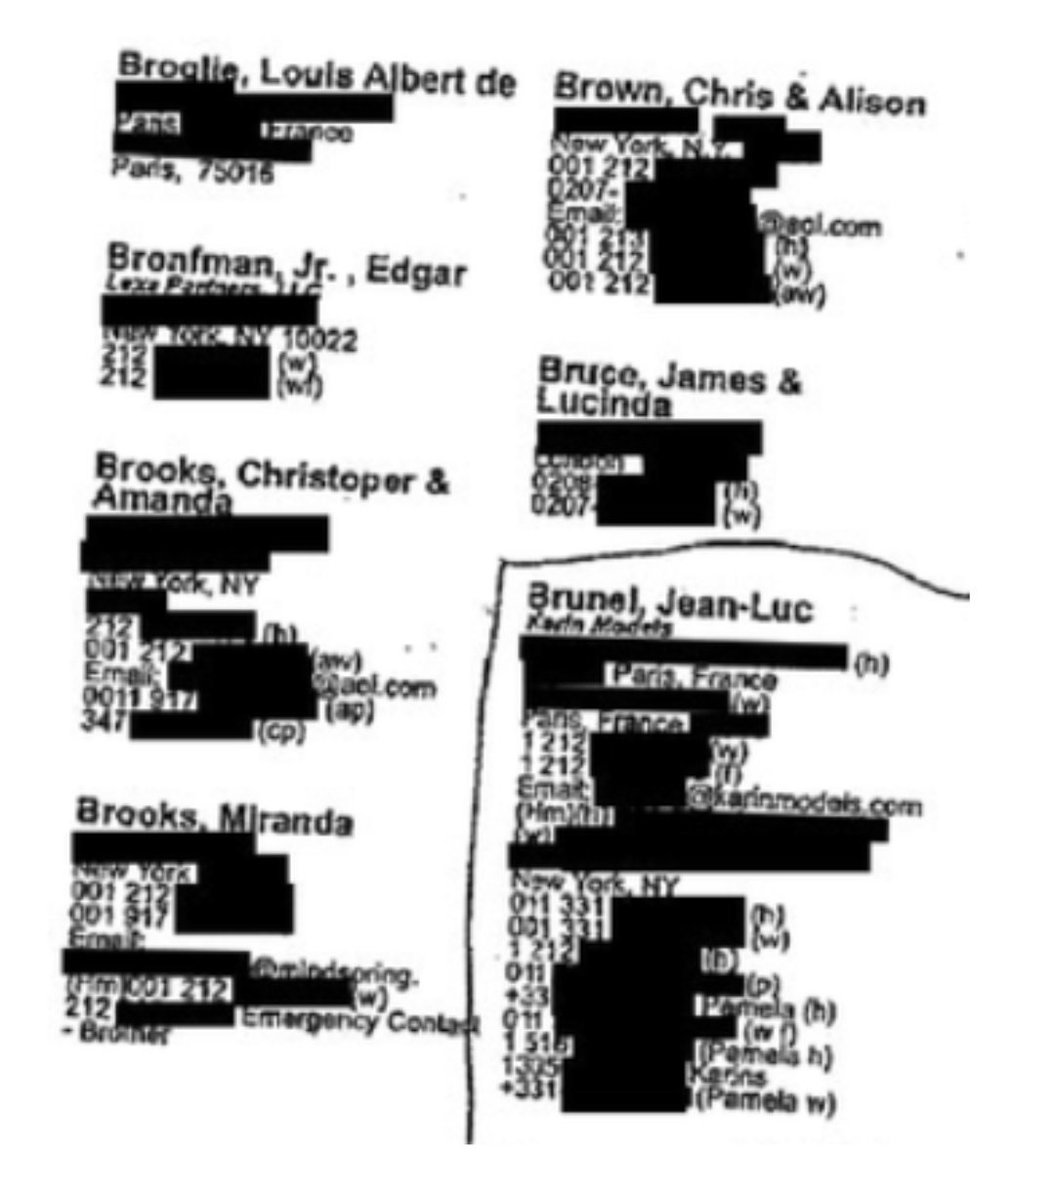 The actor Nigel Havers is the son of Michael Havers. His step-daughter is Clare Bronfman, heavily implicated in the NIXVM cult. Her brother Edgar Jr. appears on Epstein's list. Edgar Sr. was director of the Institute for Jewish Policy Research.  https://threader.app/thread/1026923031757815808